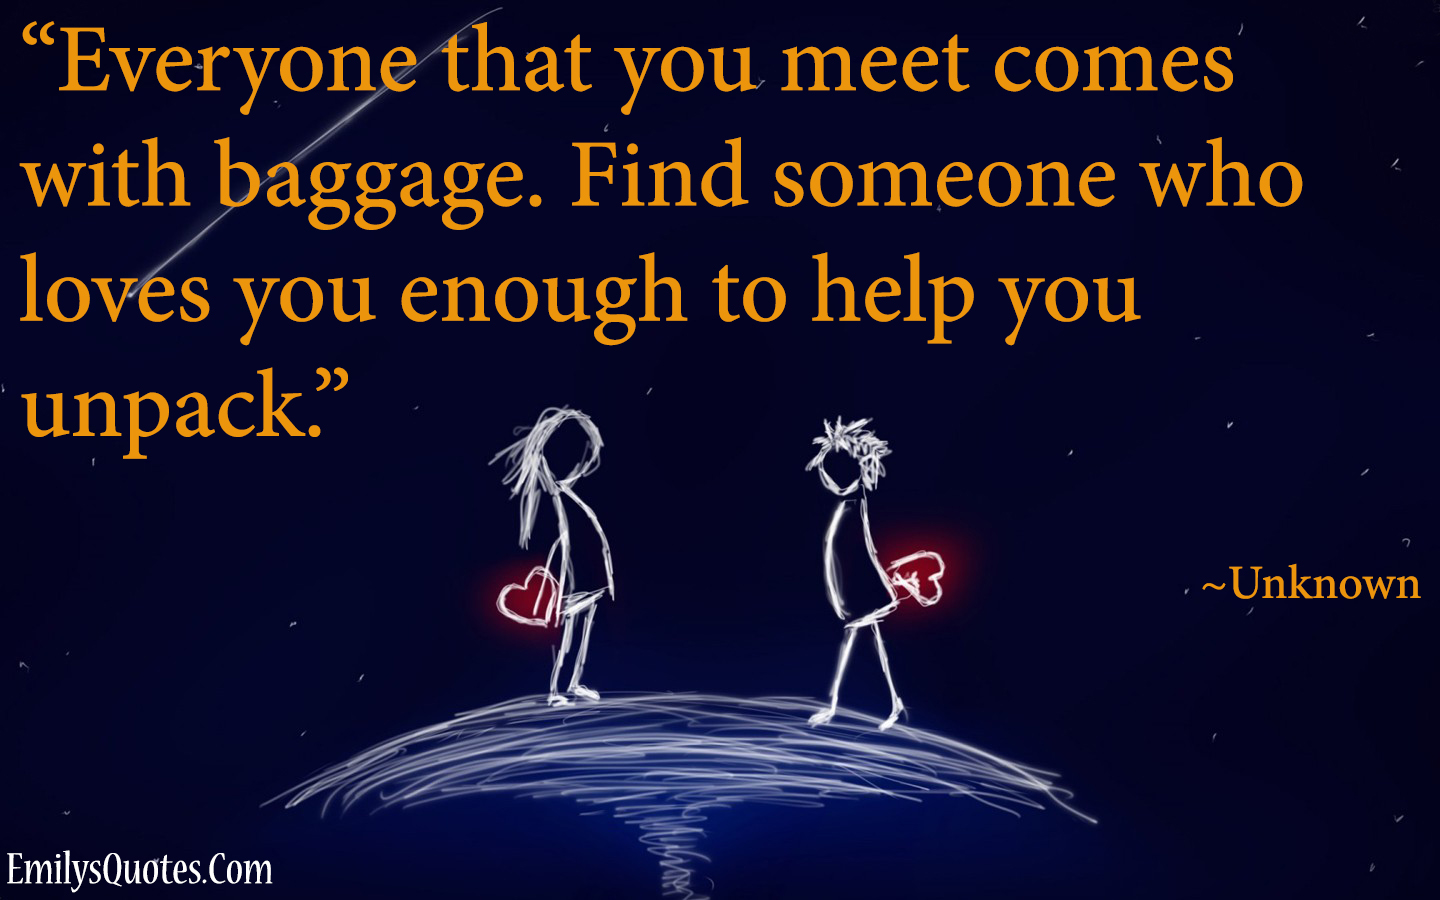 Everyone that you meet comes with baggage. Find someone who loves you enough to help you unpack